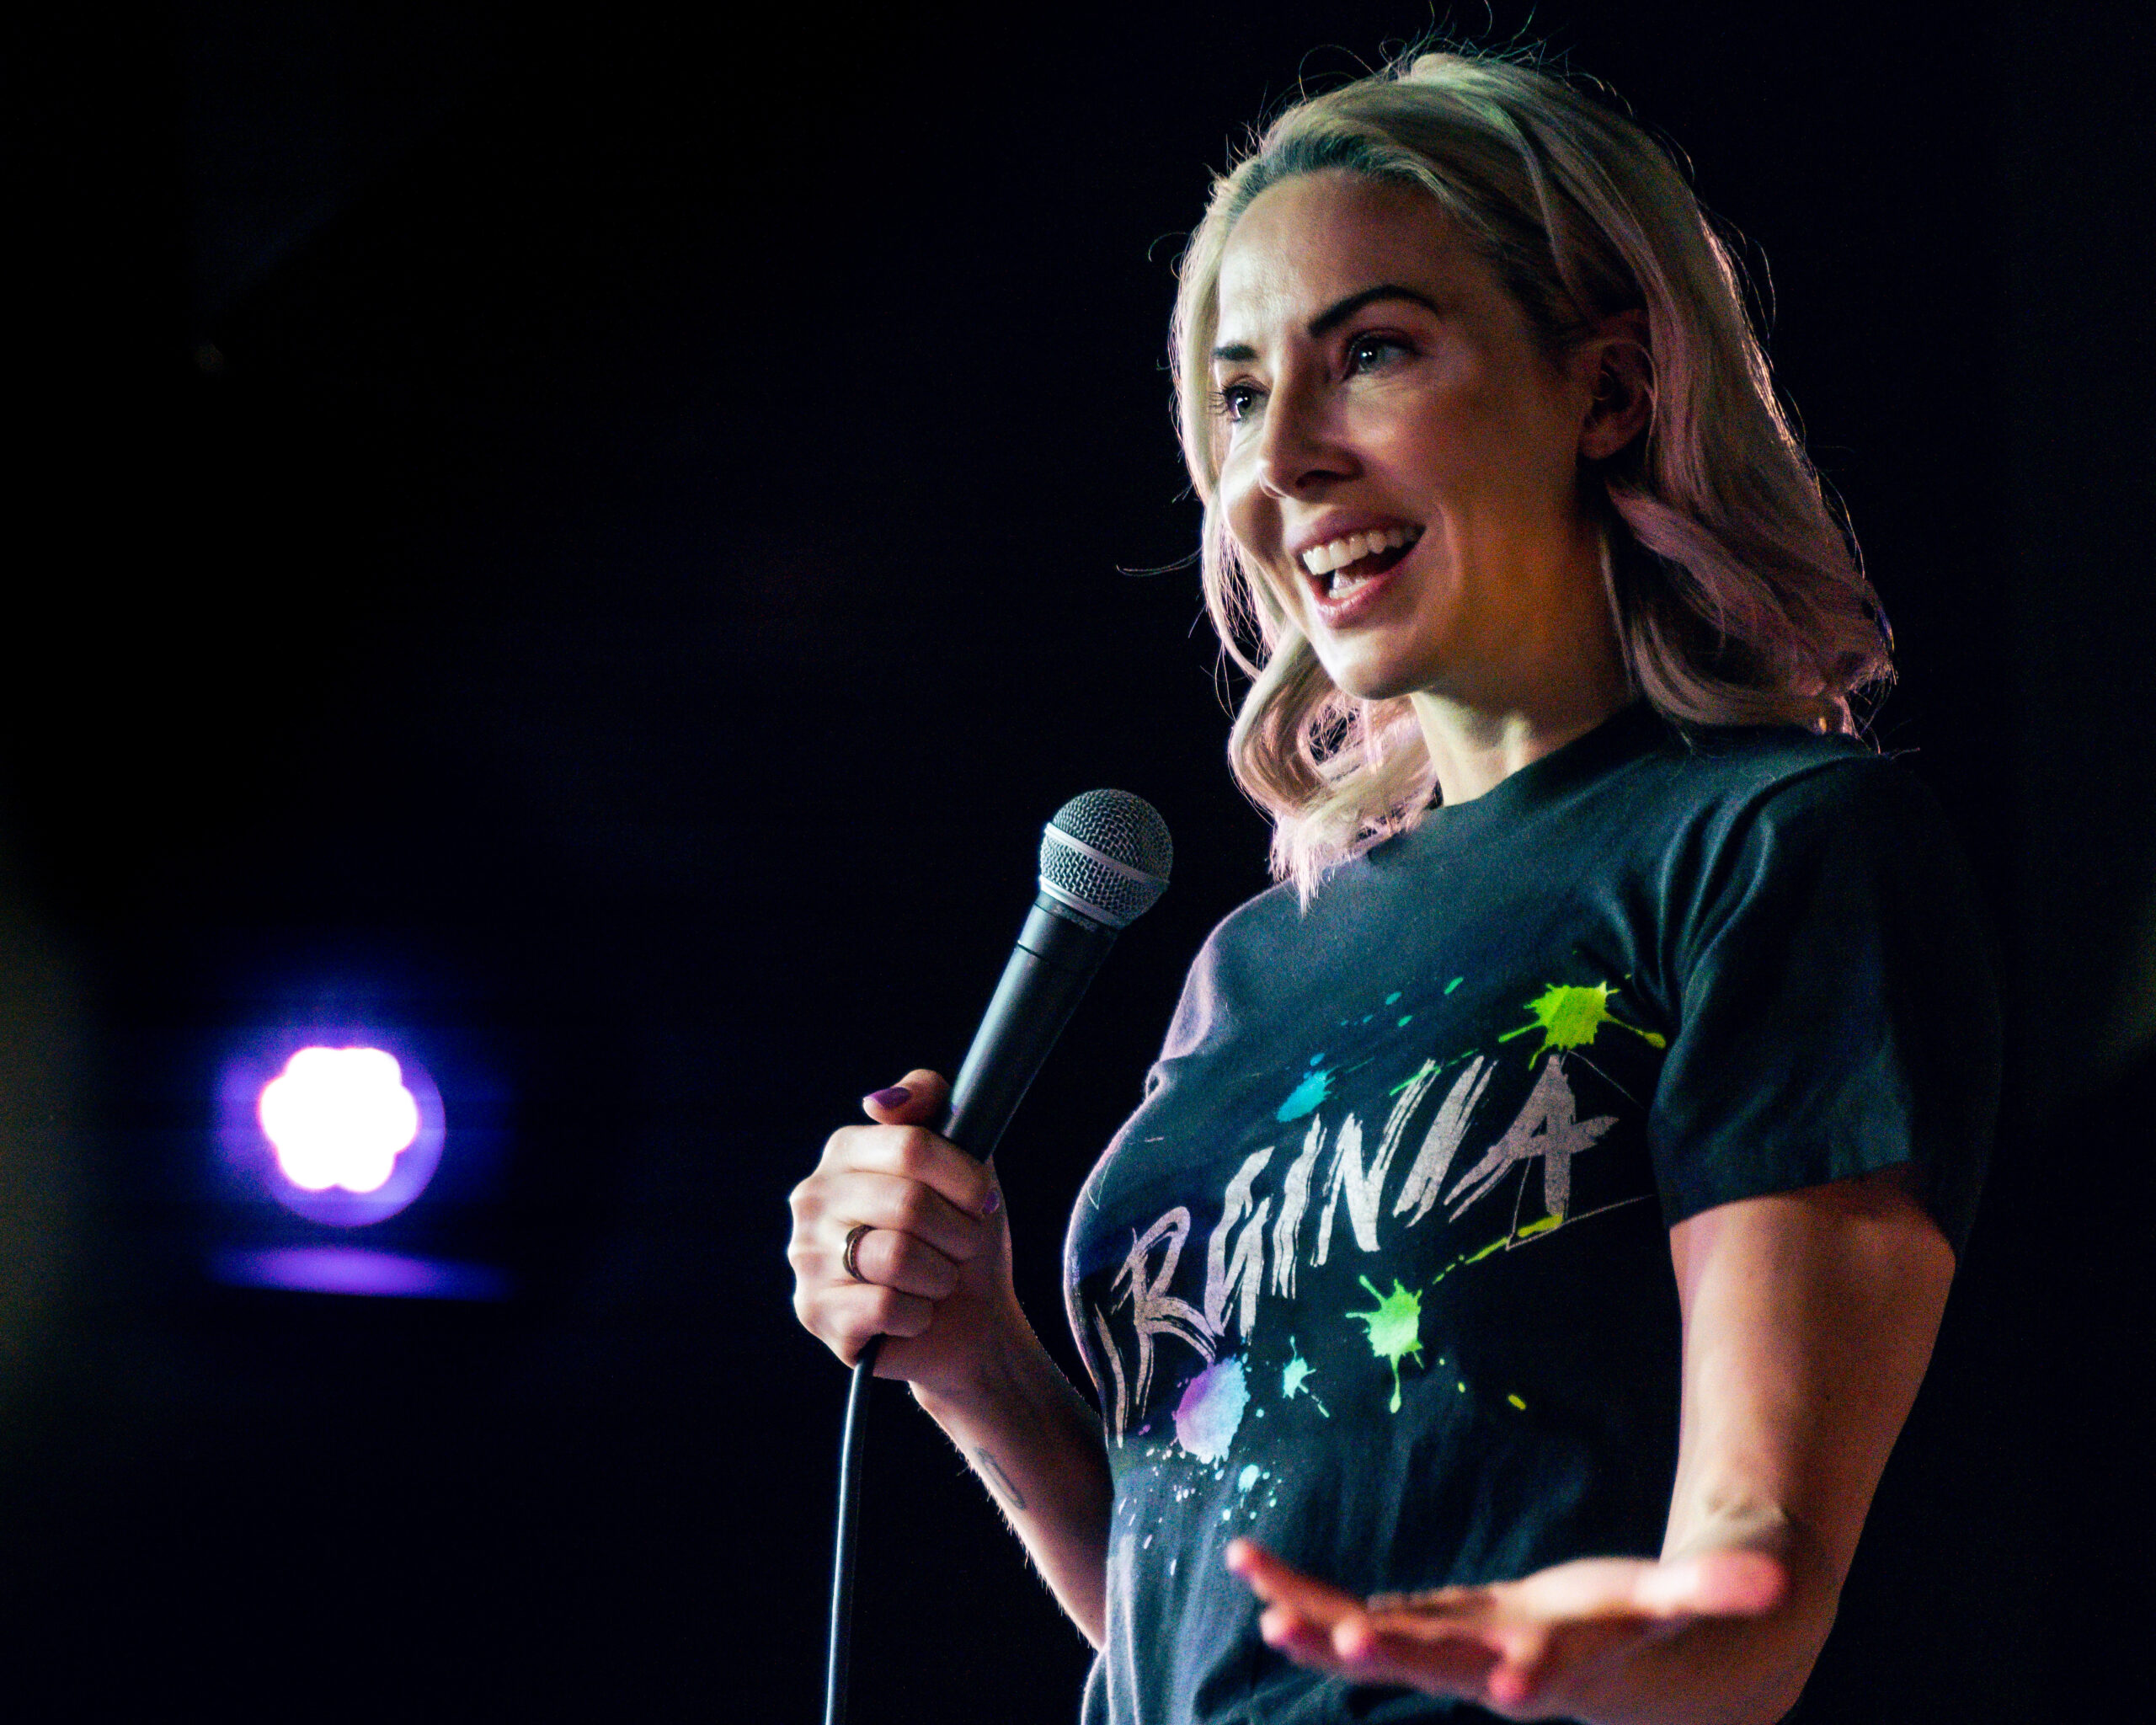 Comedian Whitney Cummings performs at WHBPAC on July 1. COURTESY THE ARTIST